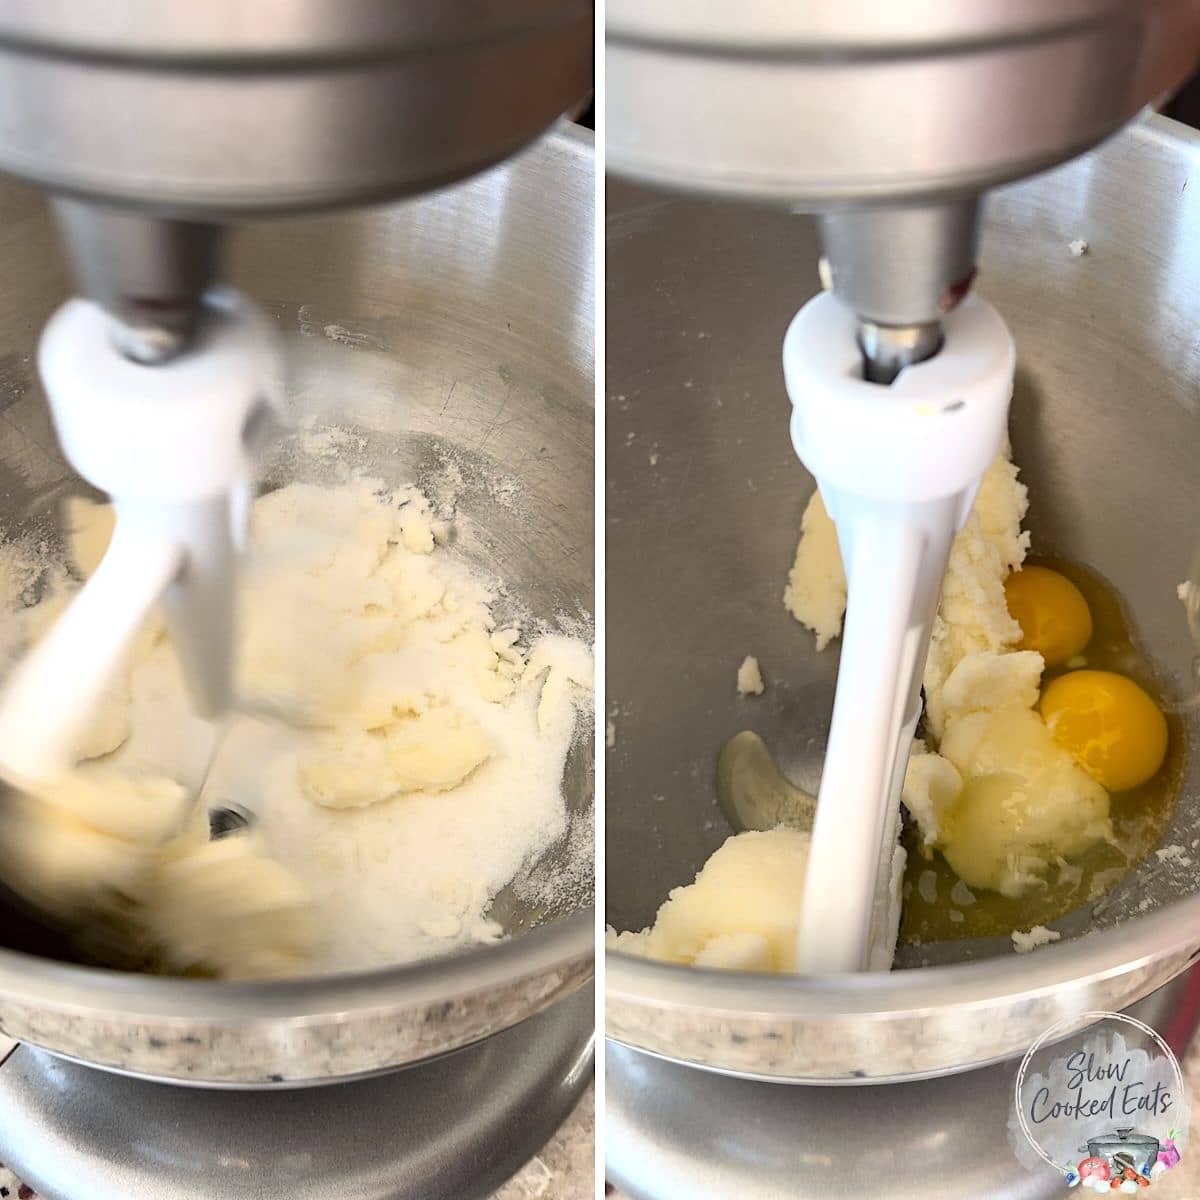 Using an electric mixer to mix sugar butter and then eggs to make banana bread in a crockpot.